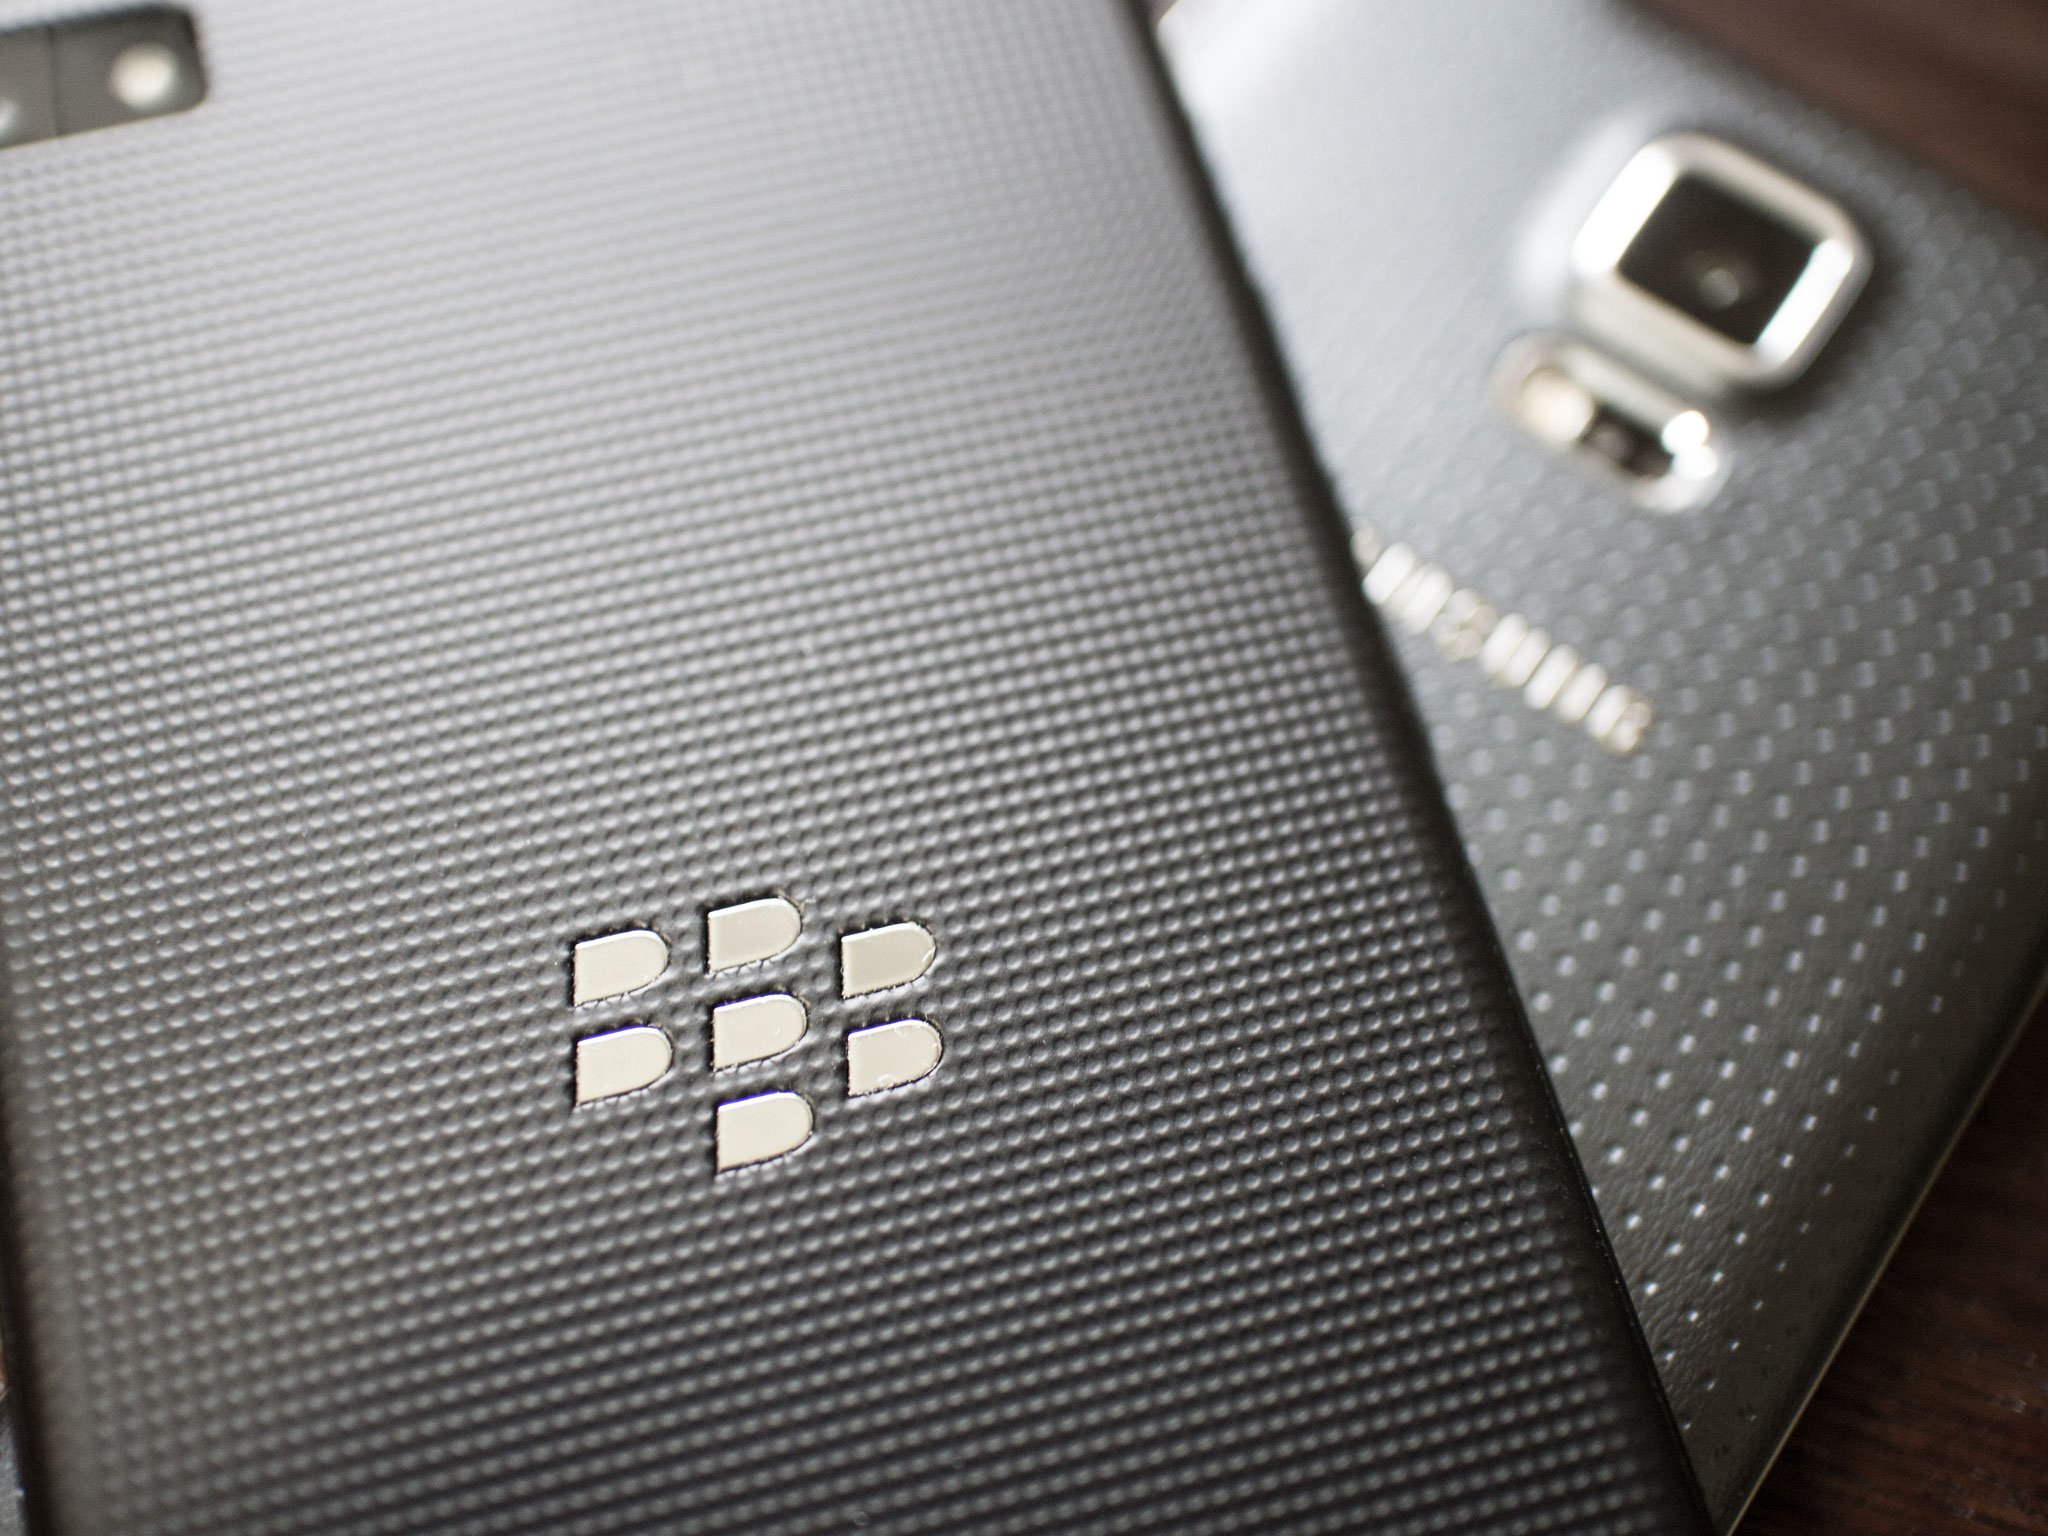 BlackBerry reportedly considering using Android on upcoming smartphone